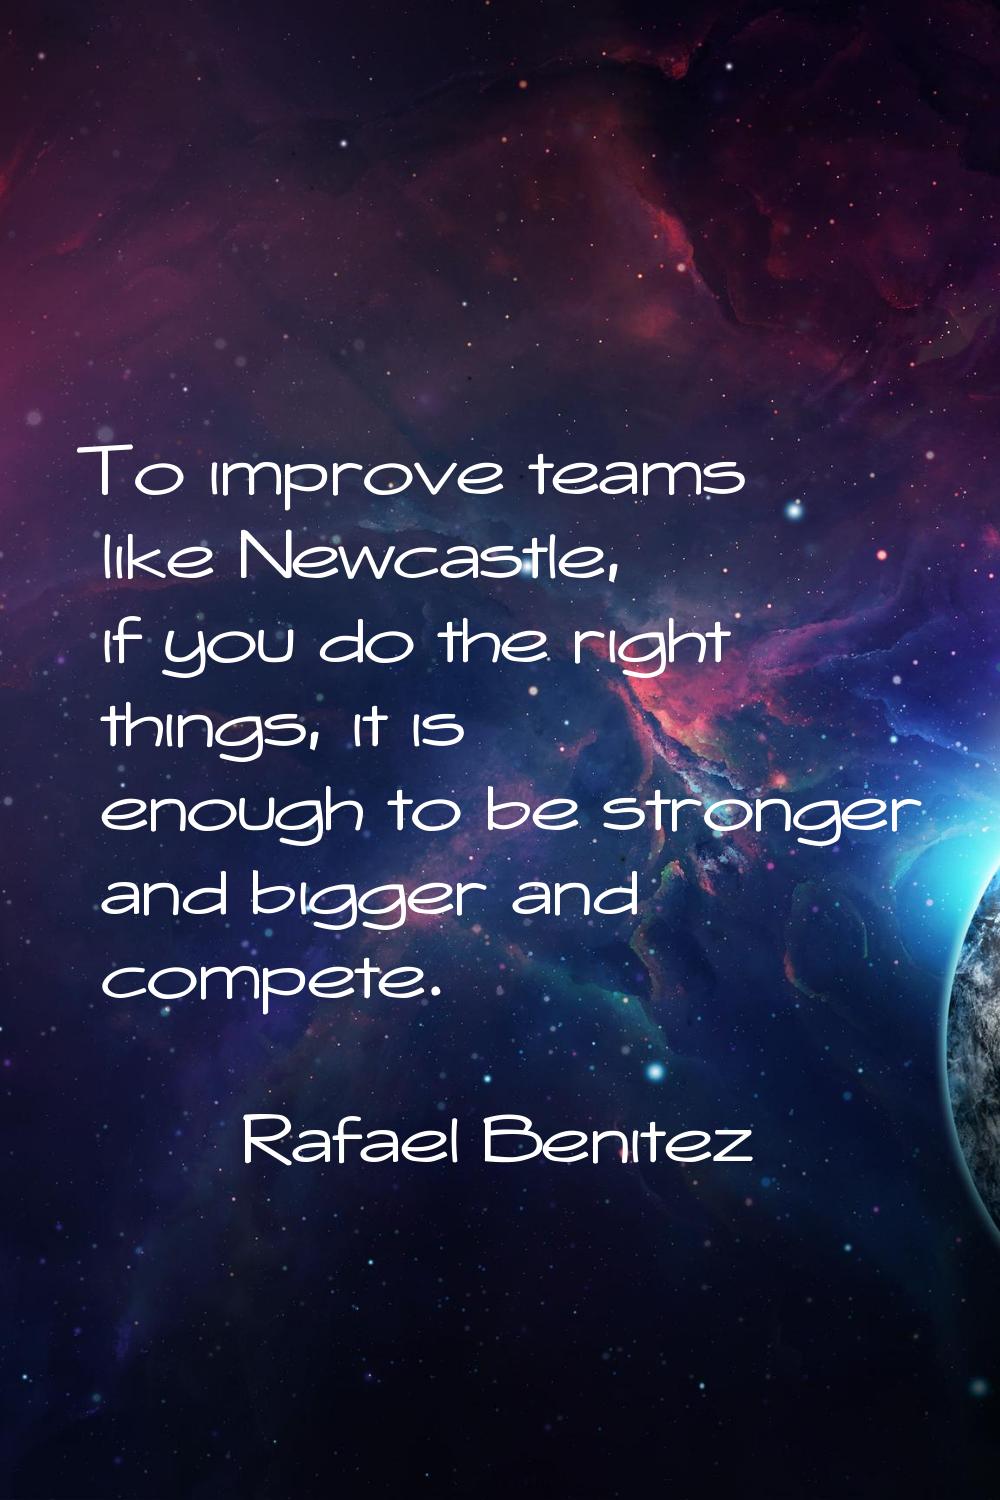 To improve teams like Newcastle, if you do the right things, it is enough to be stronger and bigger